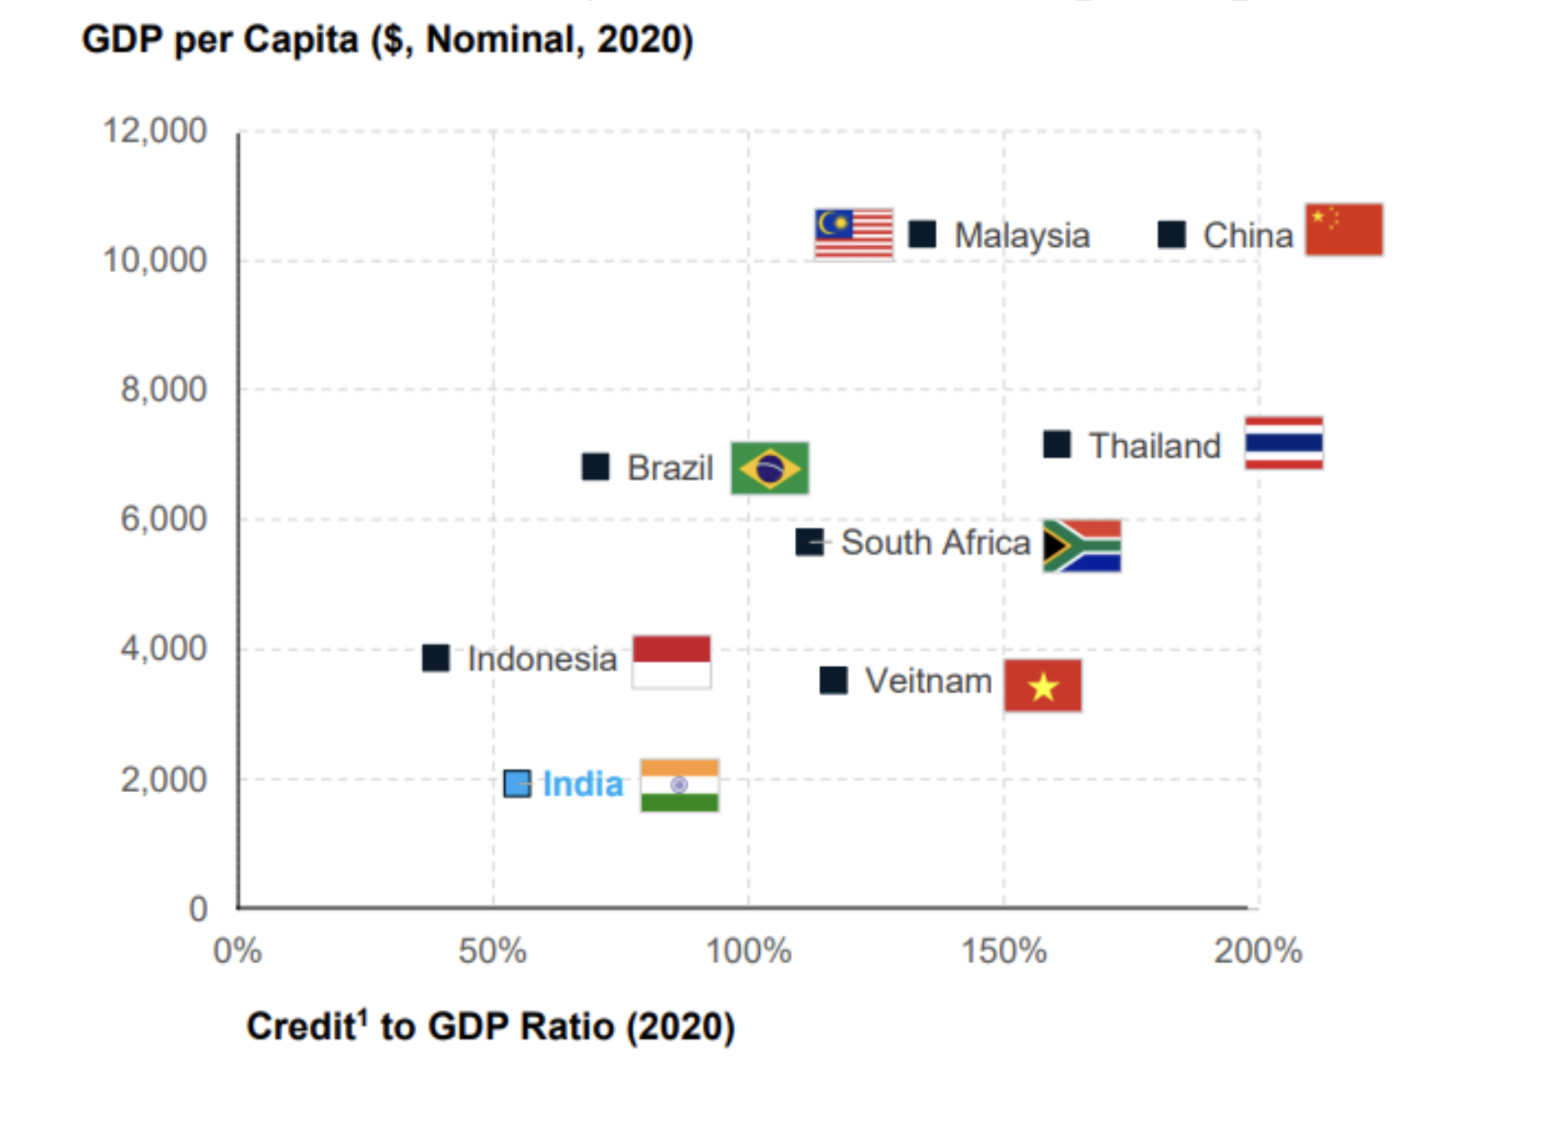 Credit to GDP ratio